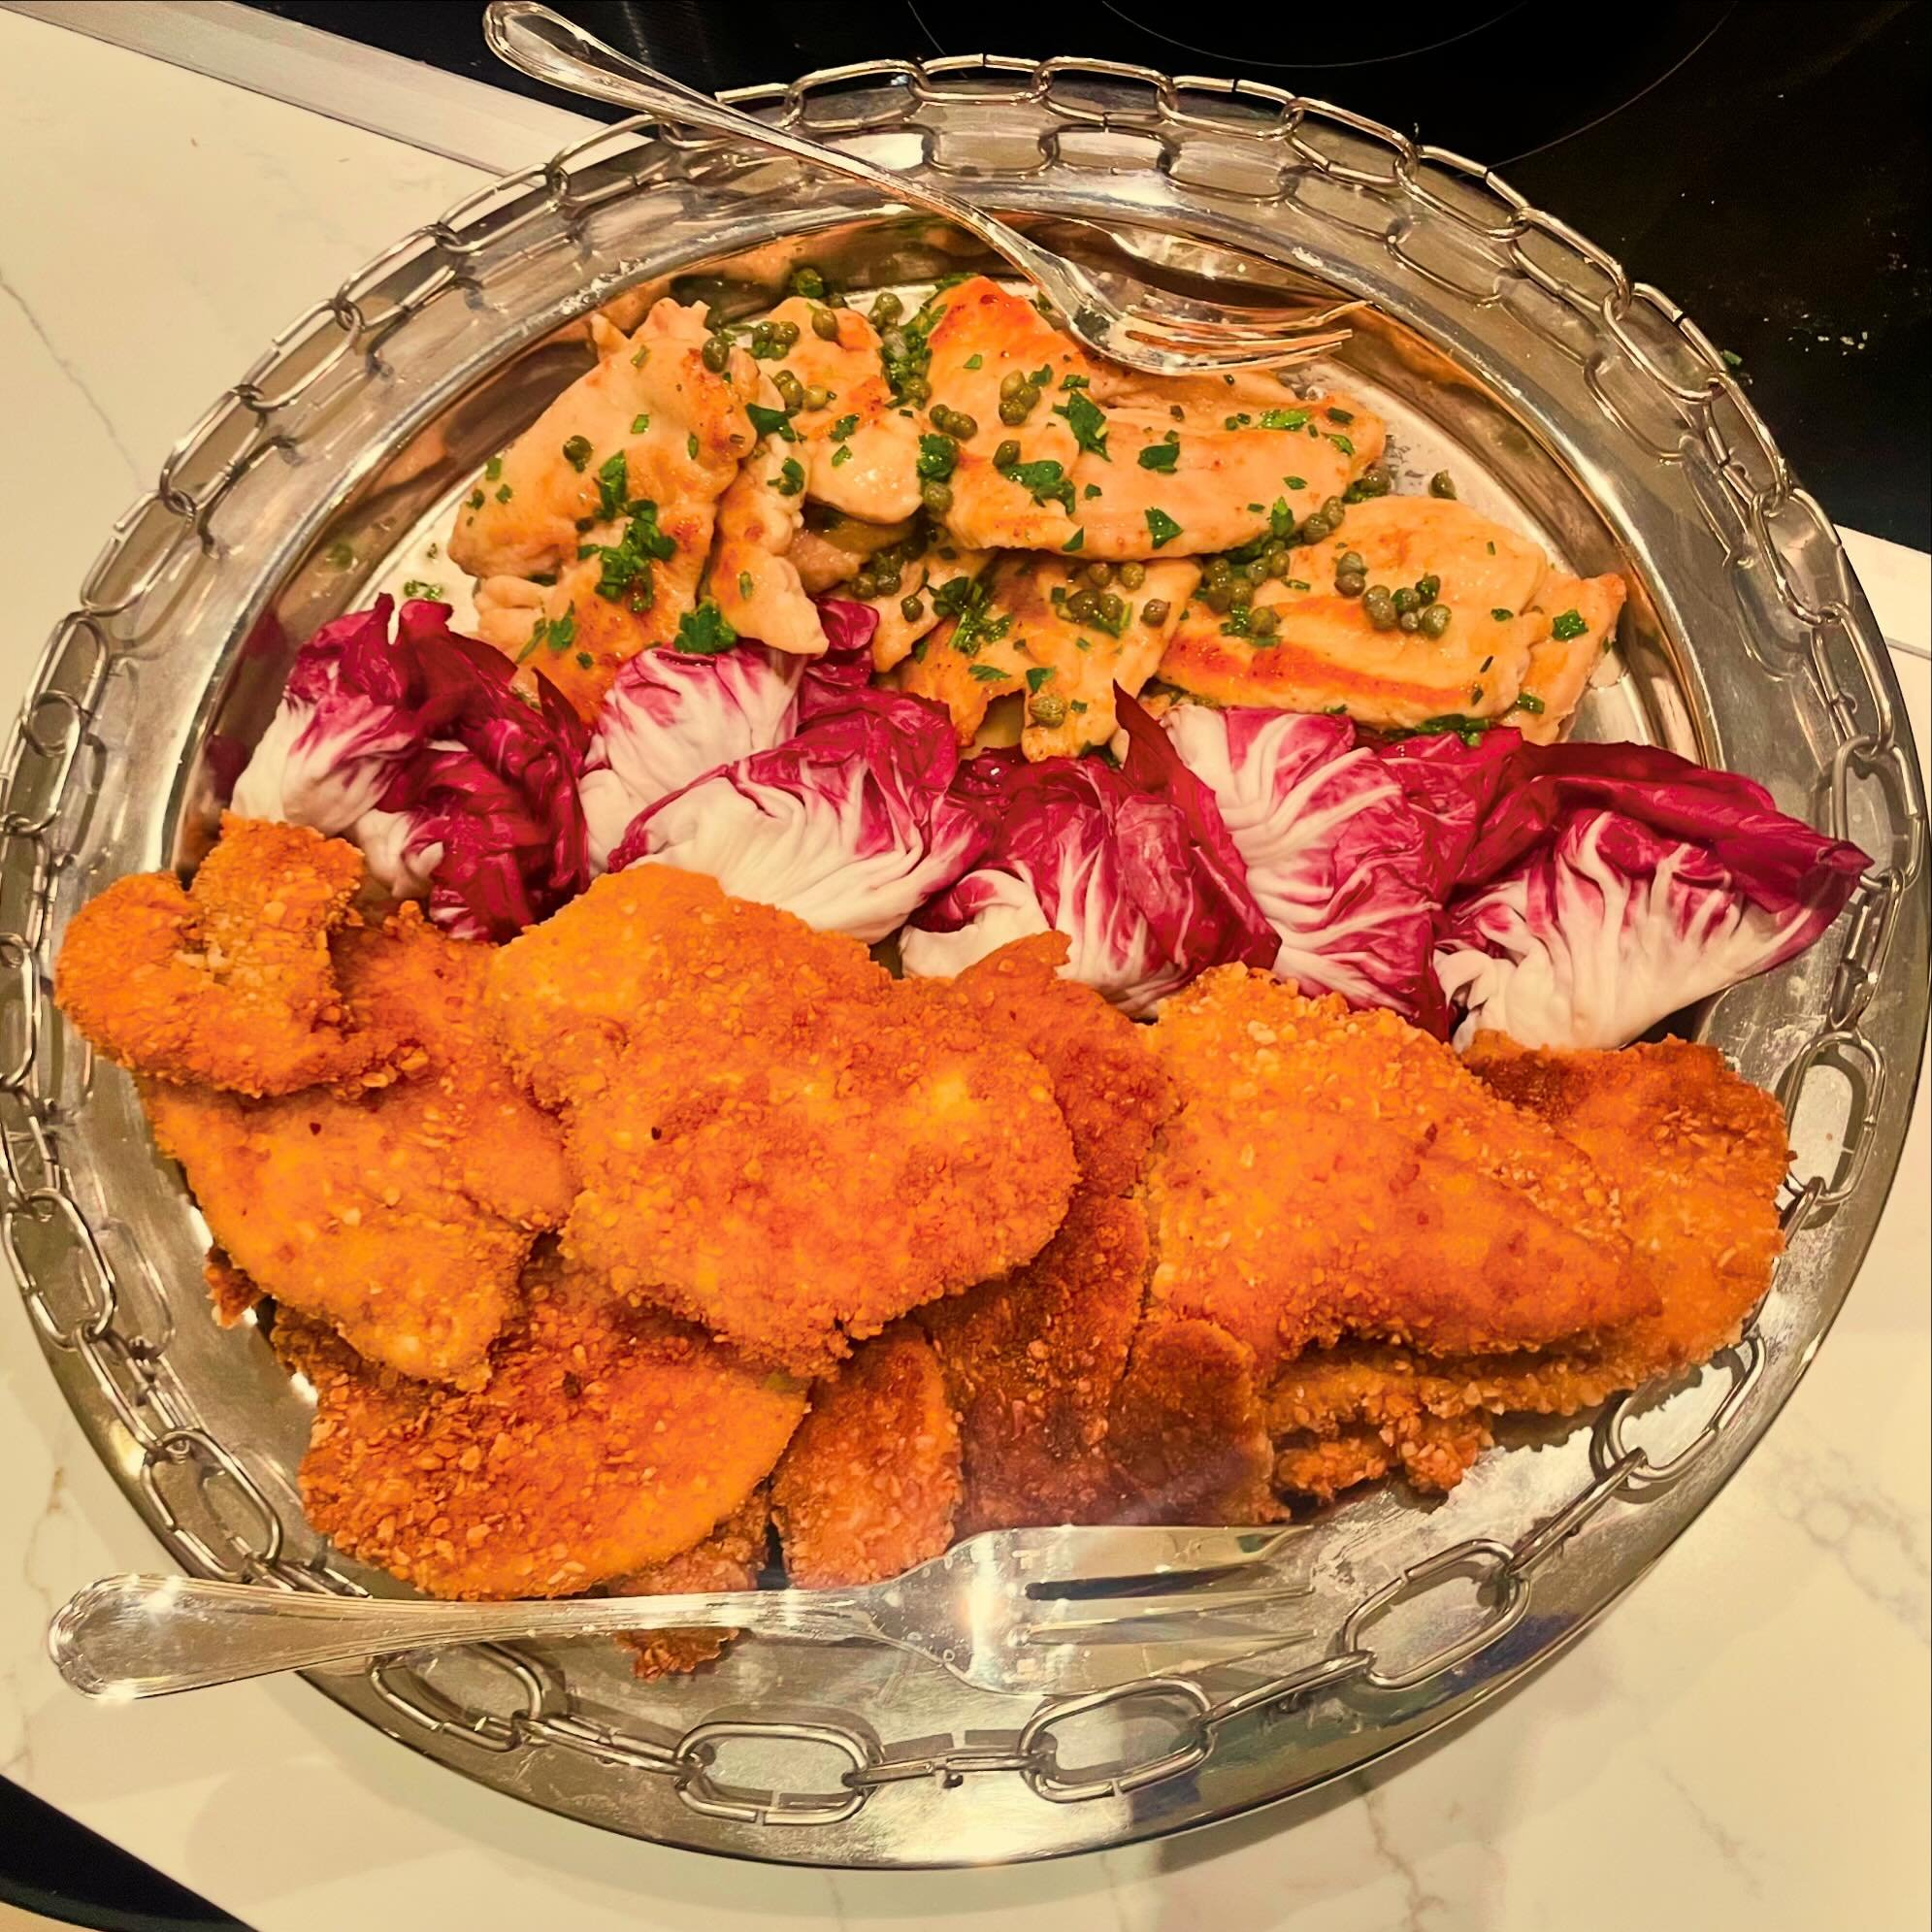 To schnitzel or piccata? That is the question. #bluaubergine #fabulousfood #catering #privatechef #passover #sederfeast #schnitzel